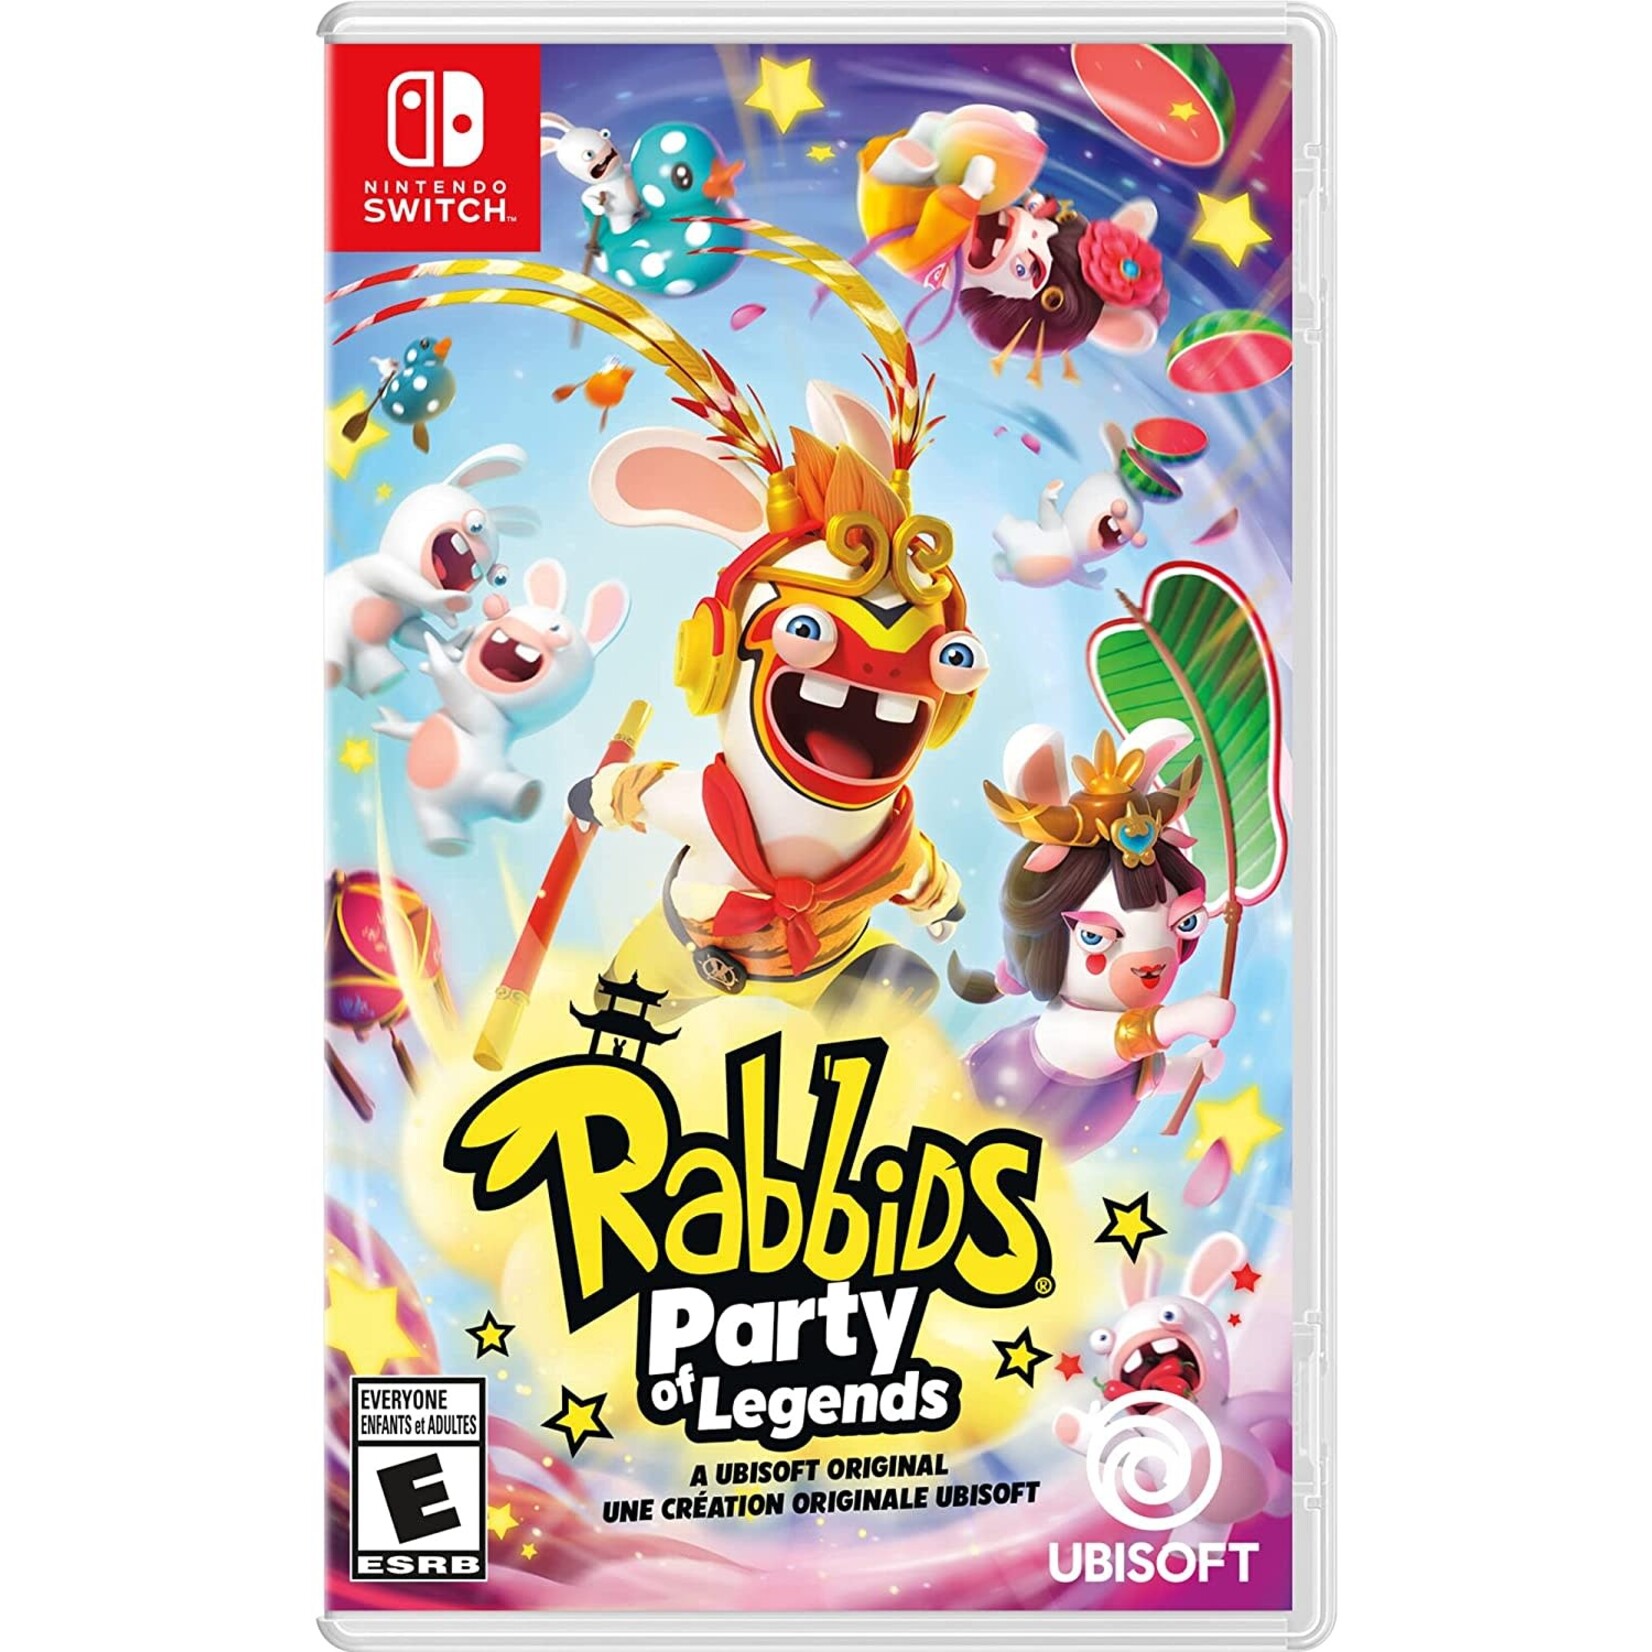 SWITCHU-Rabbids Party of Legends